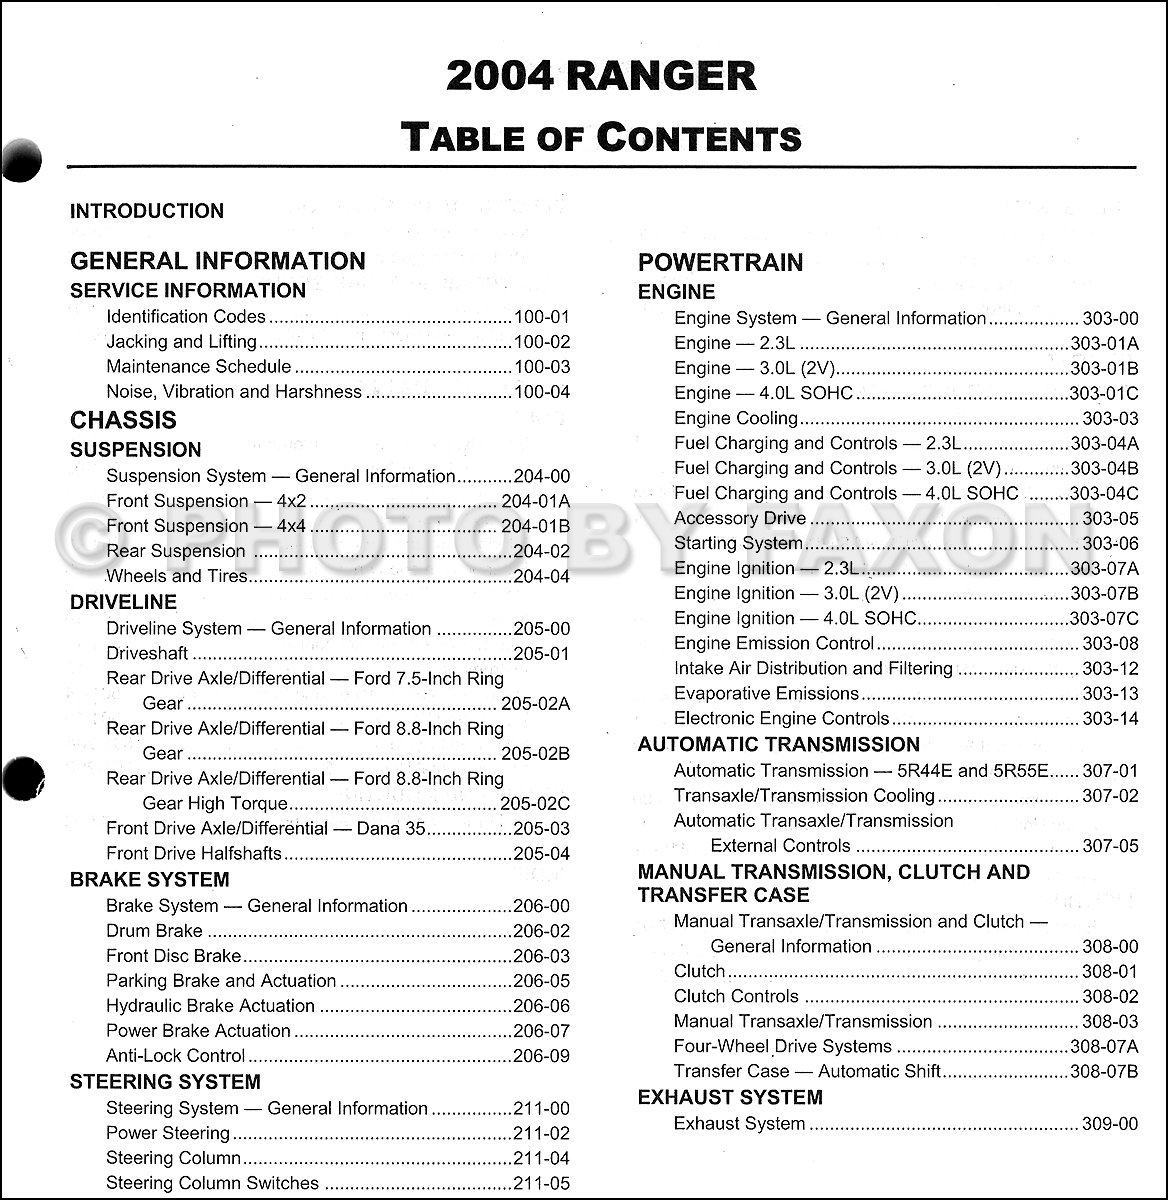 2004 Ford ranger edge owners manual #4